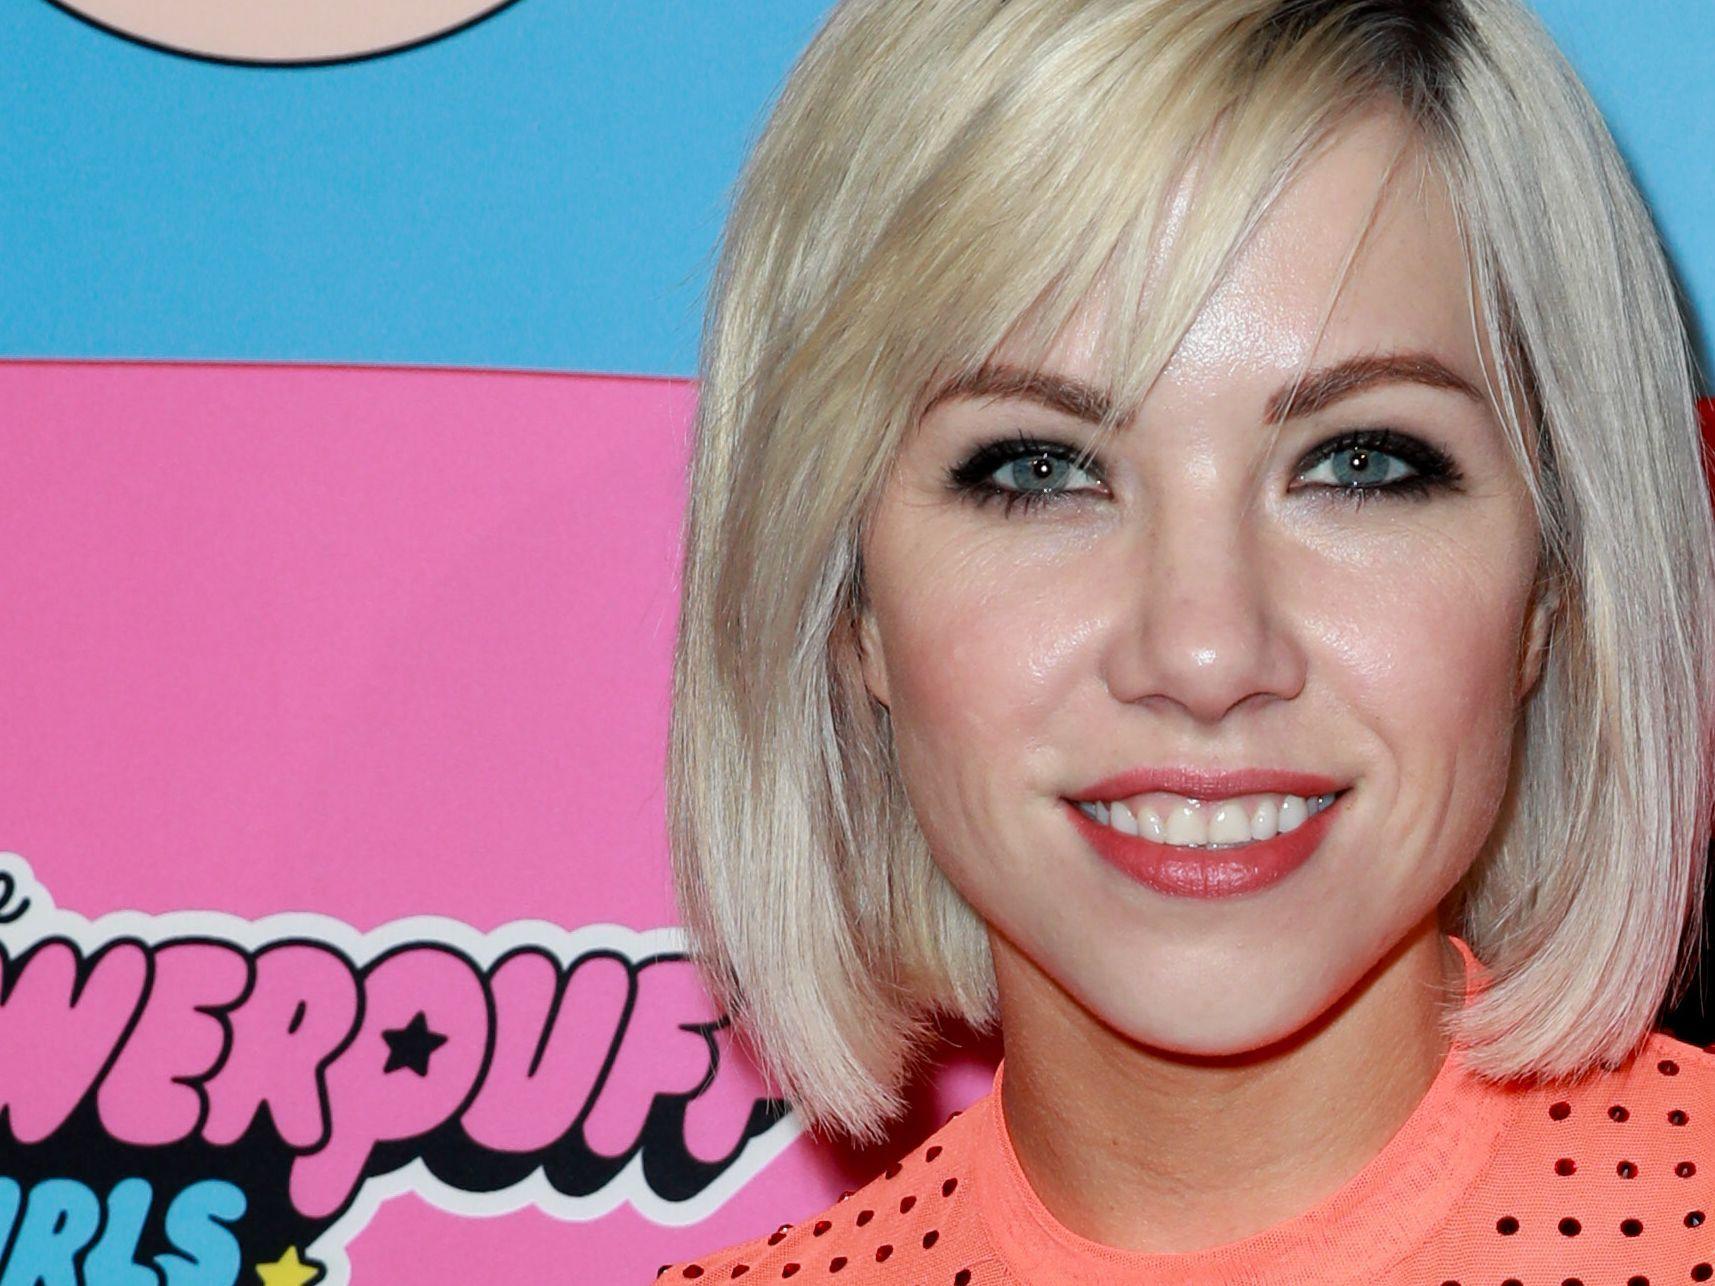 Carly Rae Jepsen's Heart Is Broken By Her Own Decisions On 'Julien